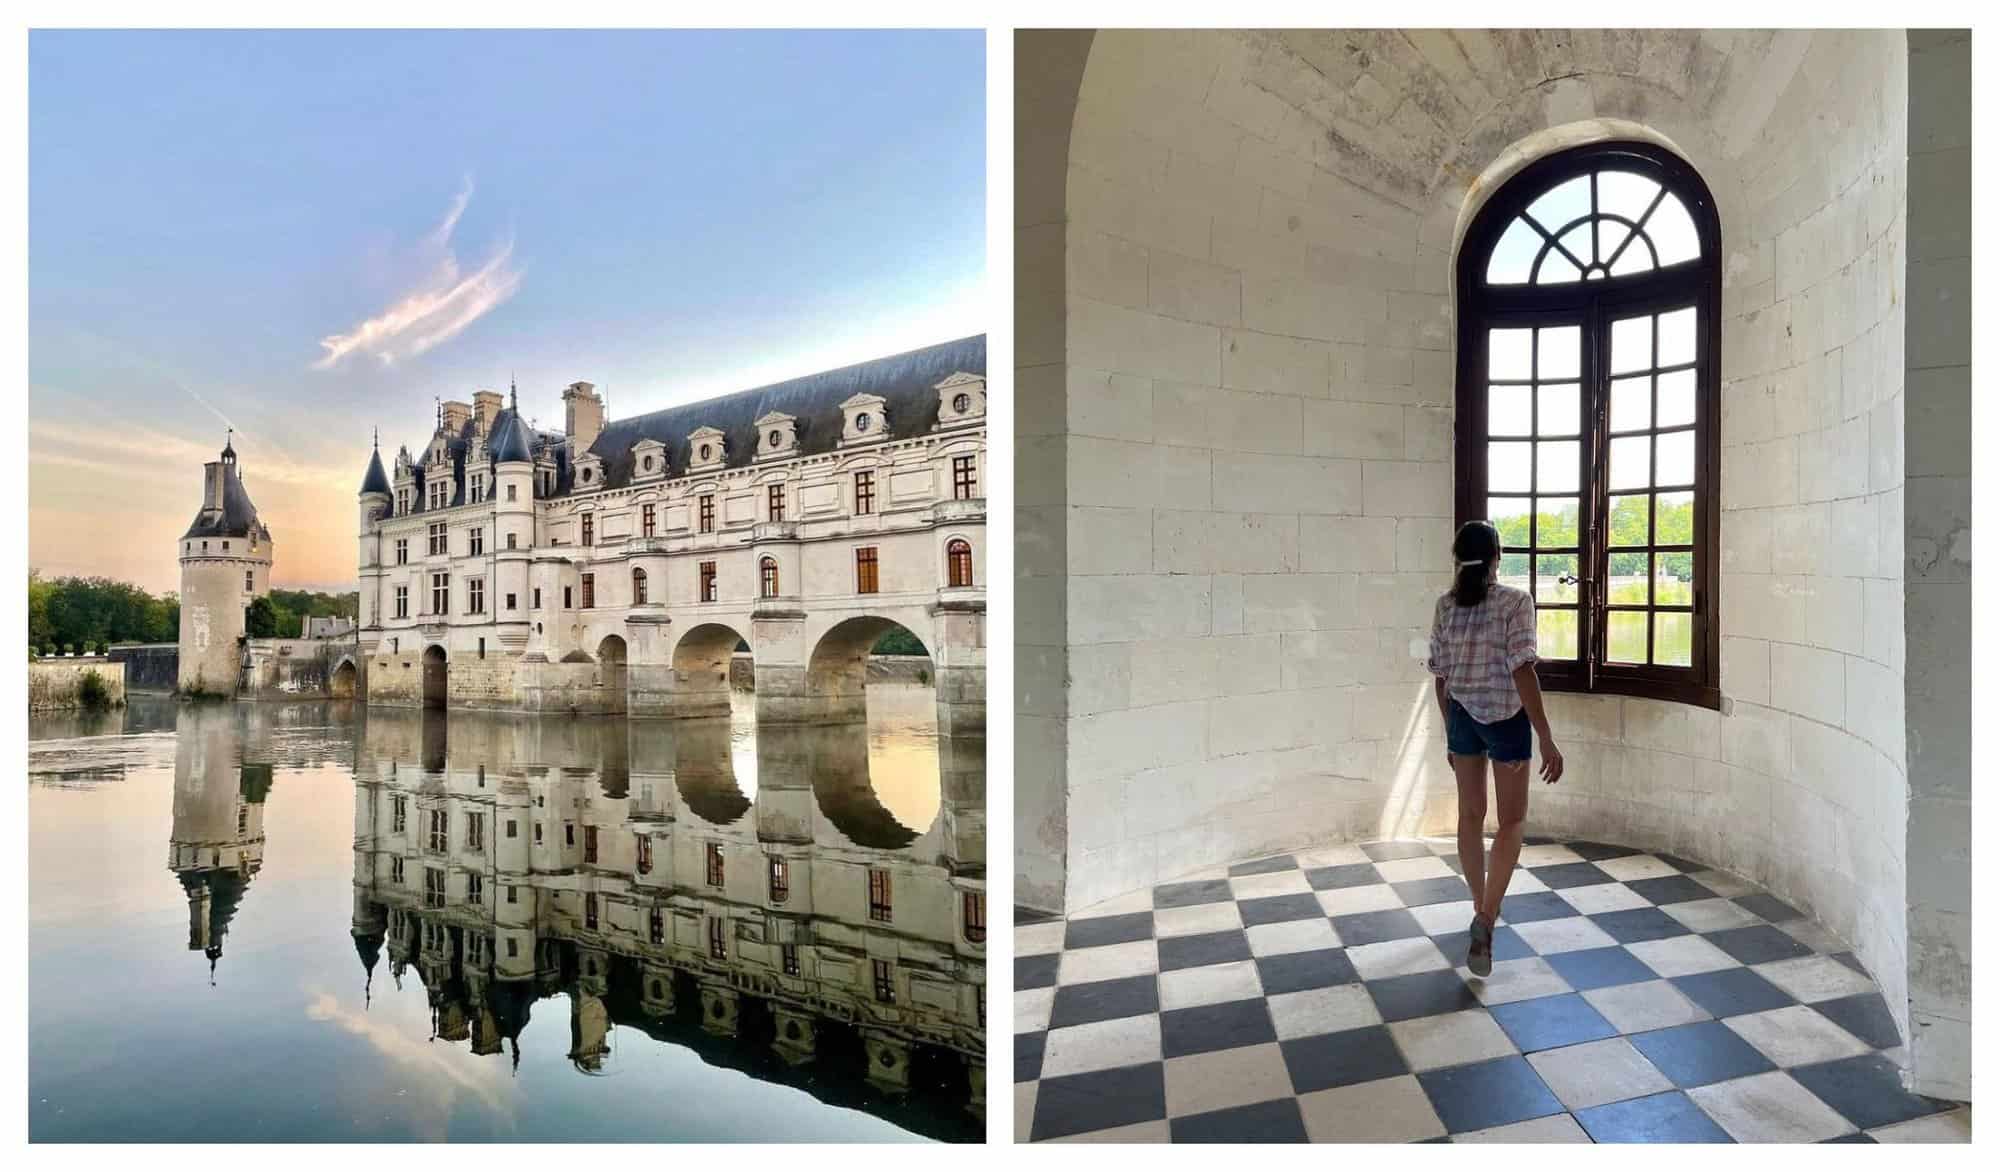 Left: Château de Chenonceau is reflected in the nearby water. Right: Woman looks out of large window inside Château de Chenonceau